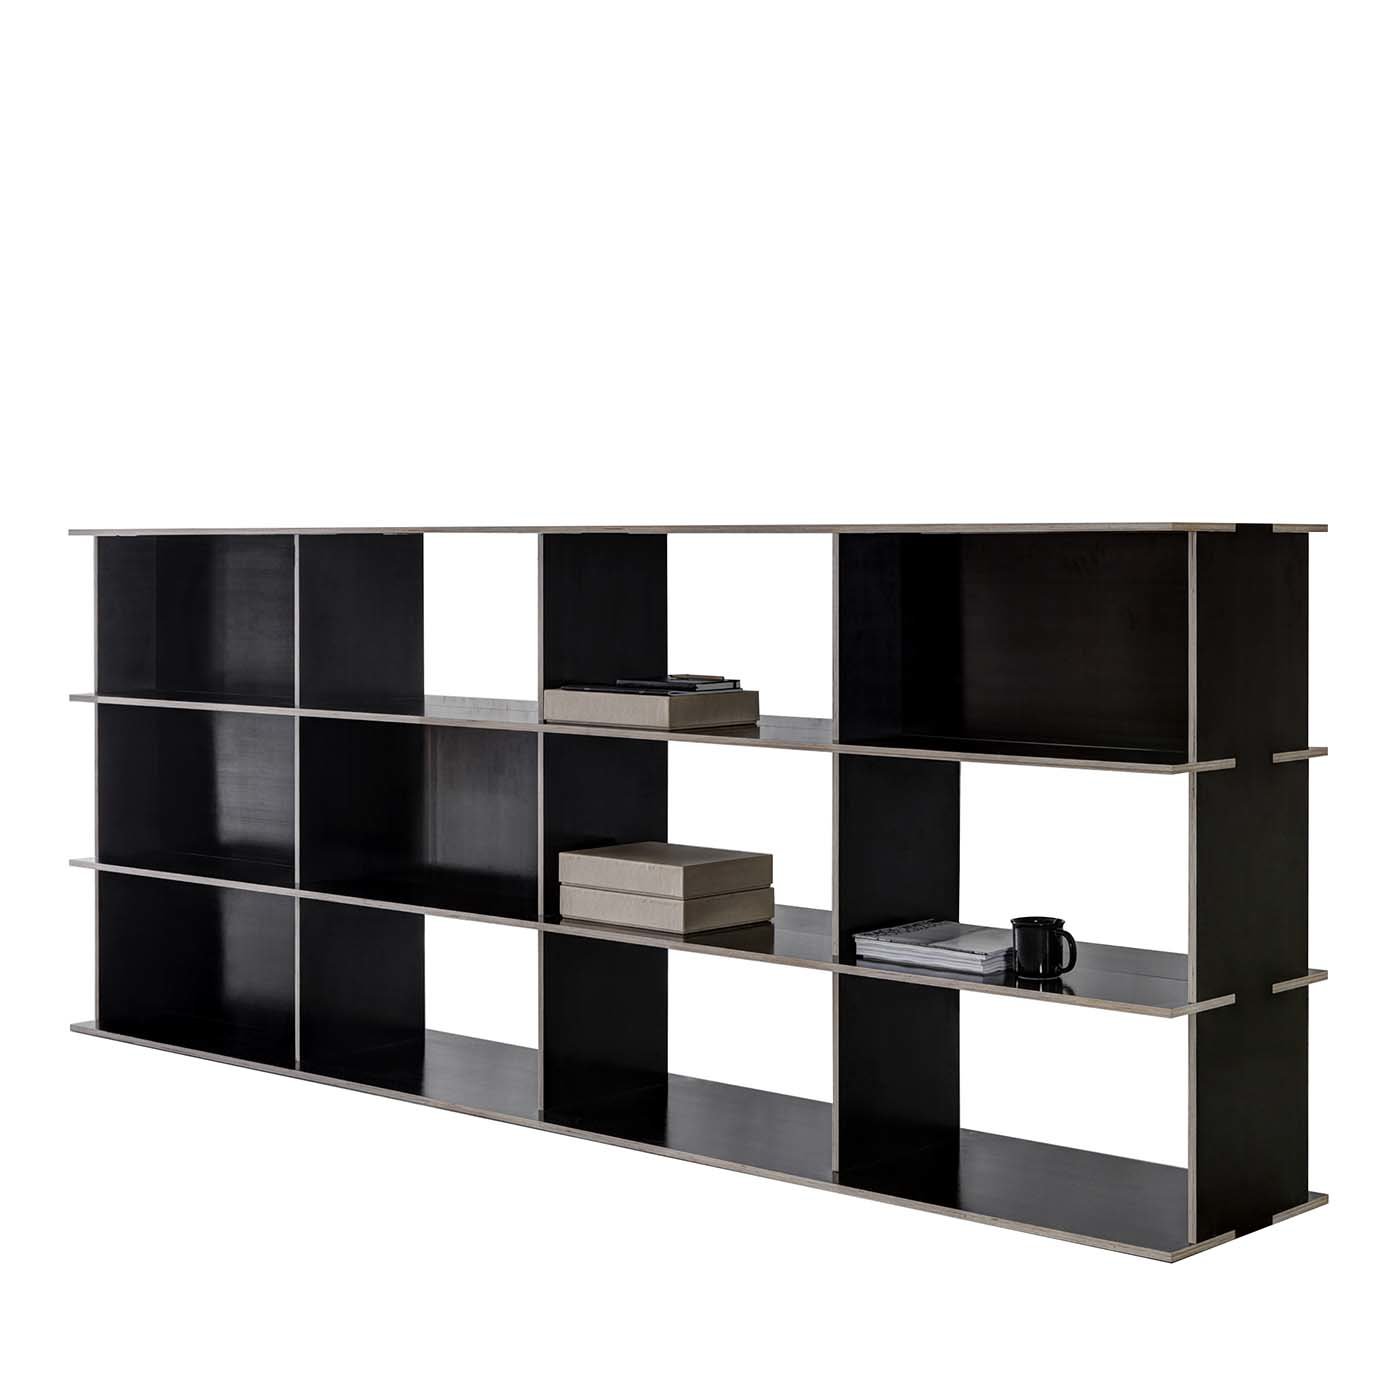 J.M.B/4.3.2 Bookcase by CCRZ - Main view